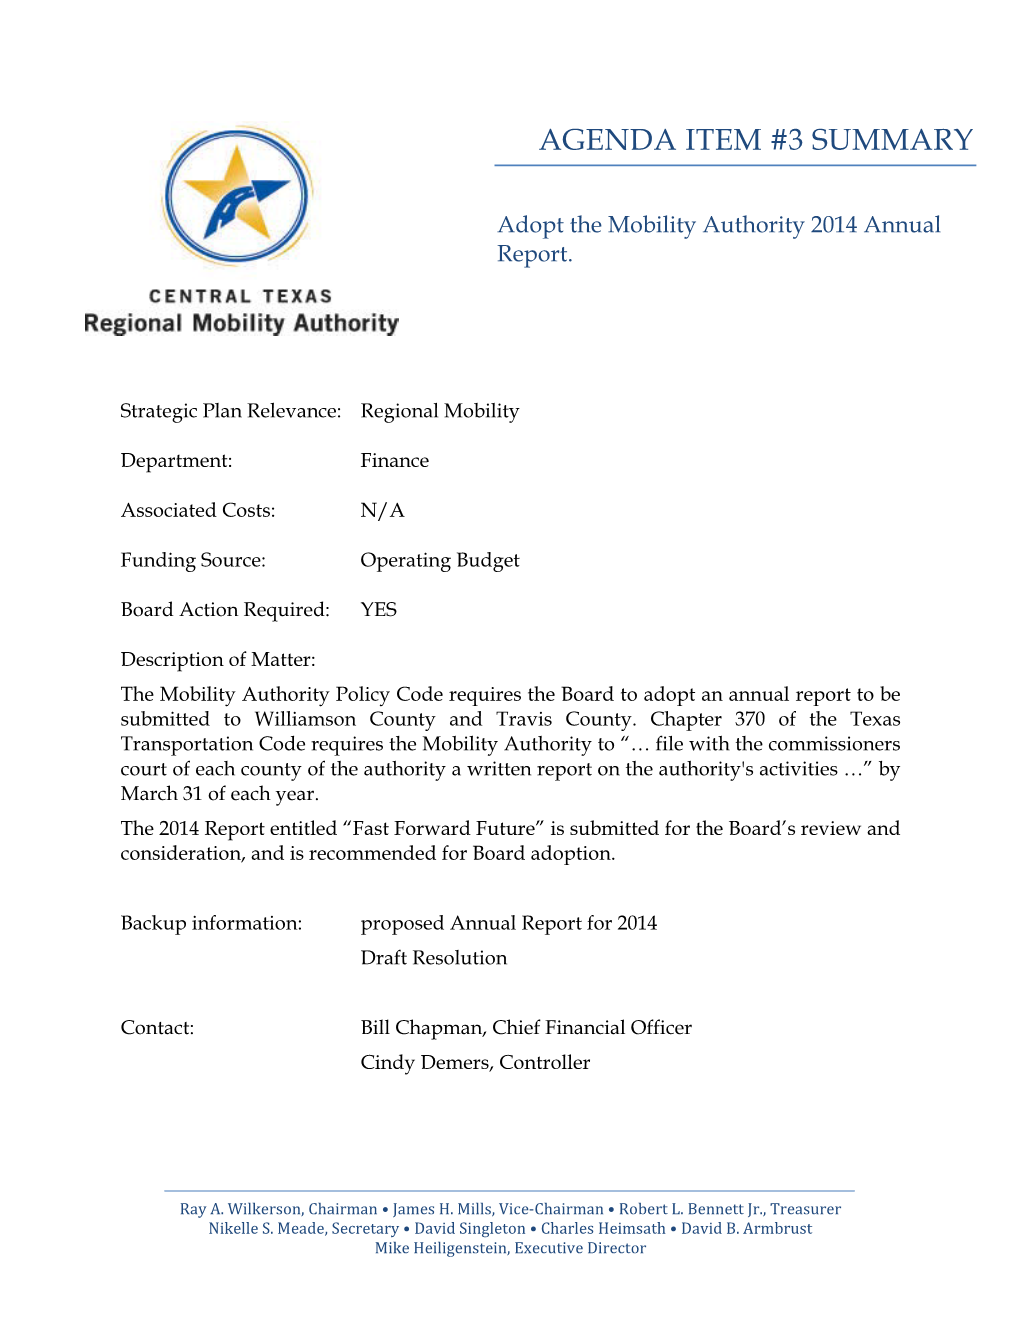 Adopt the Mobility Authority 2014 Annual Report